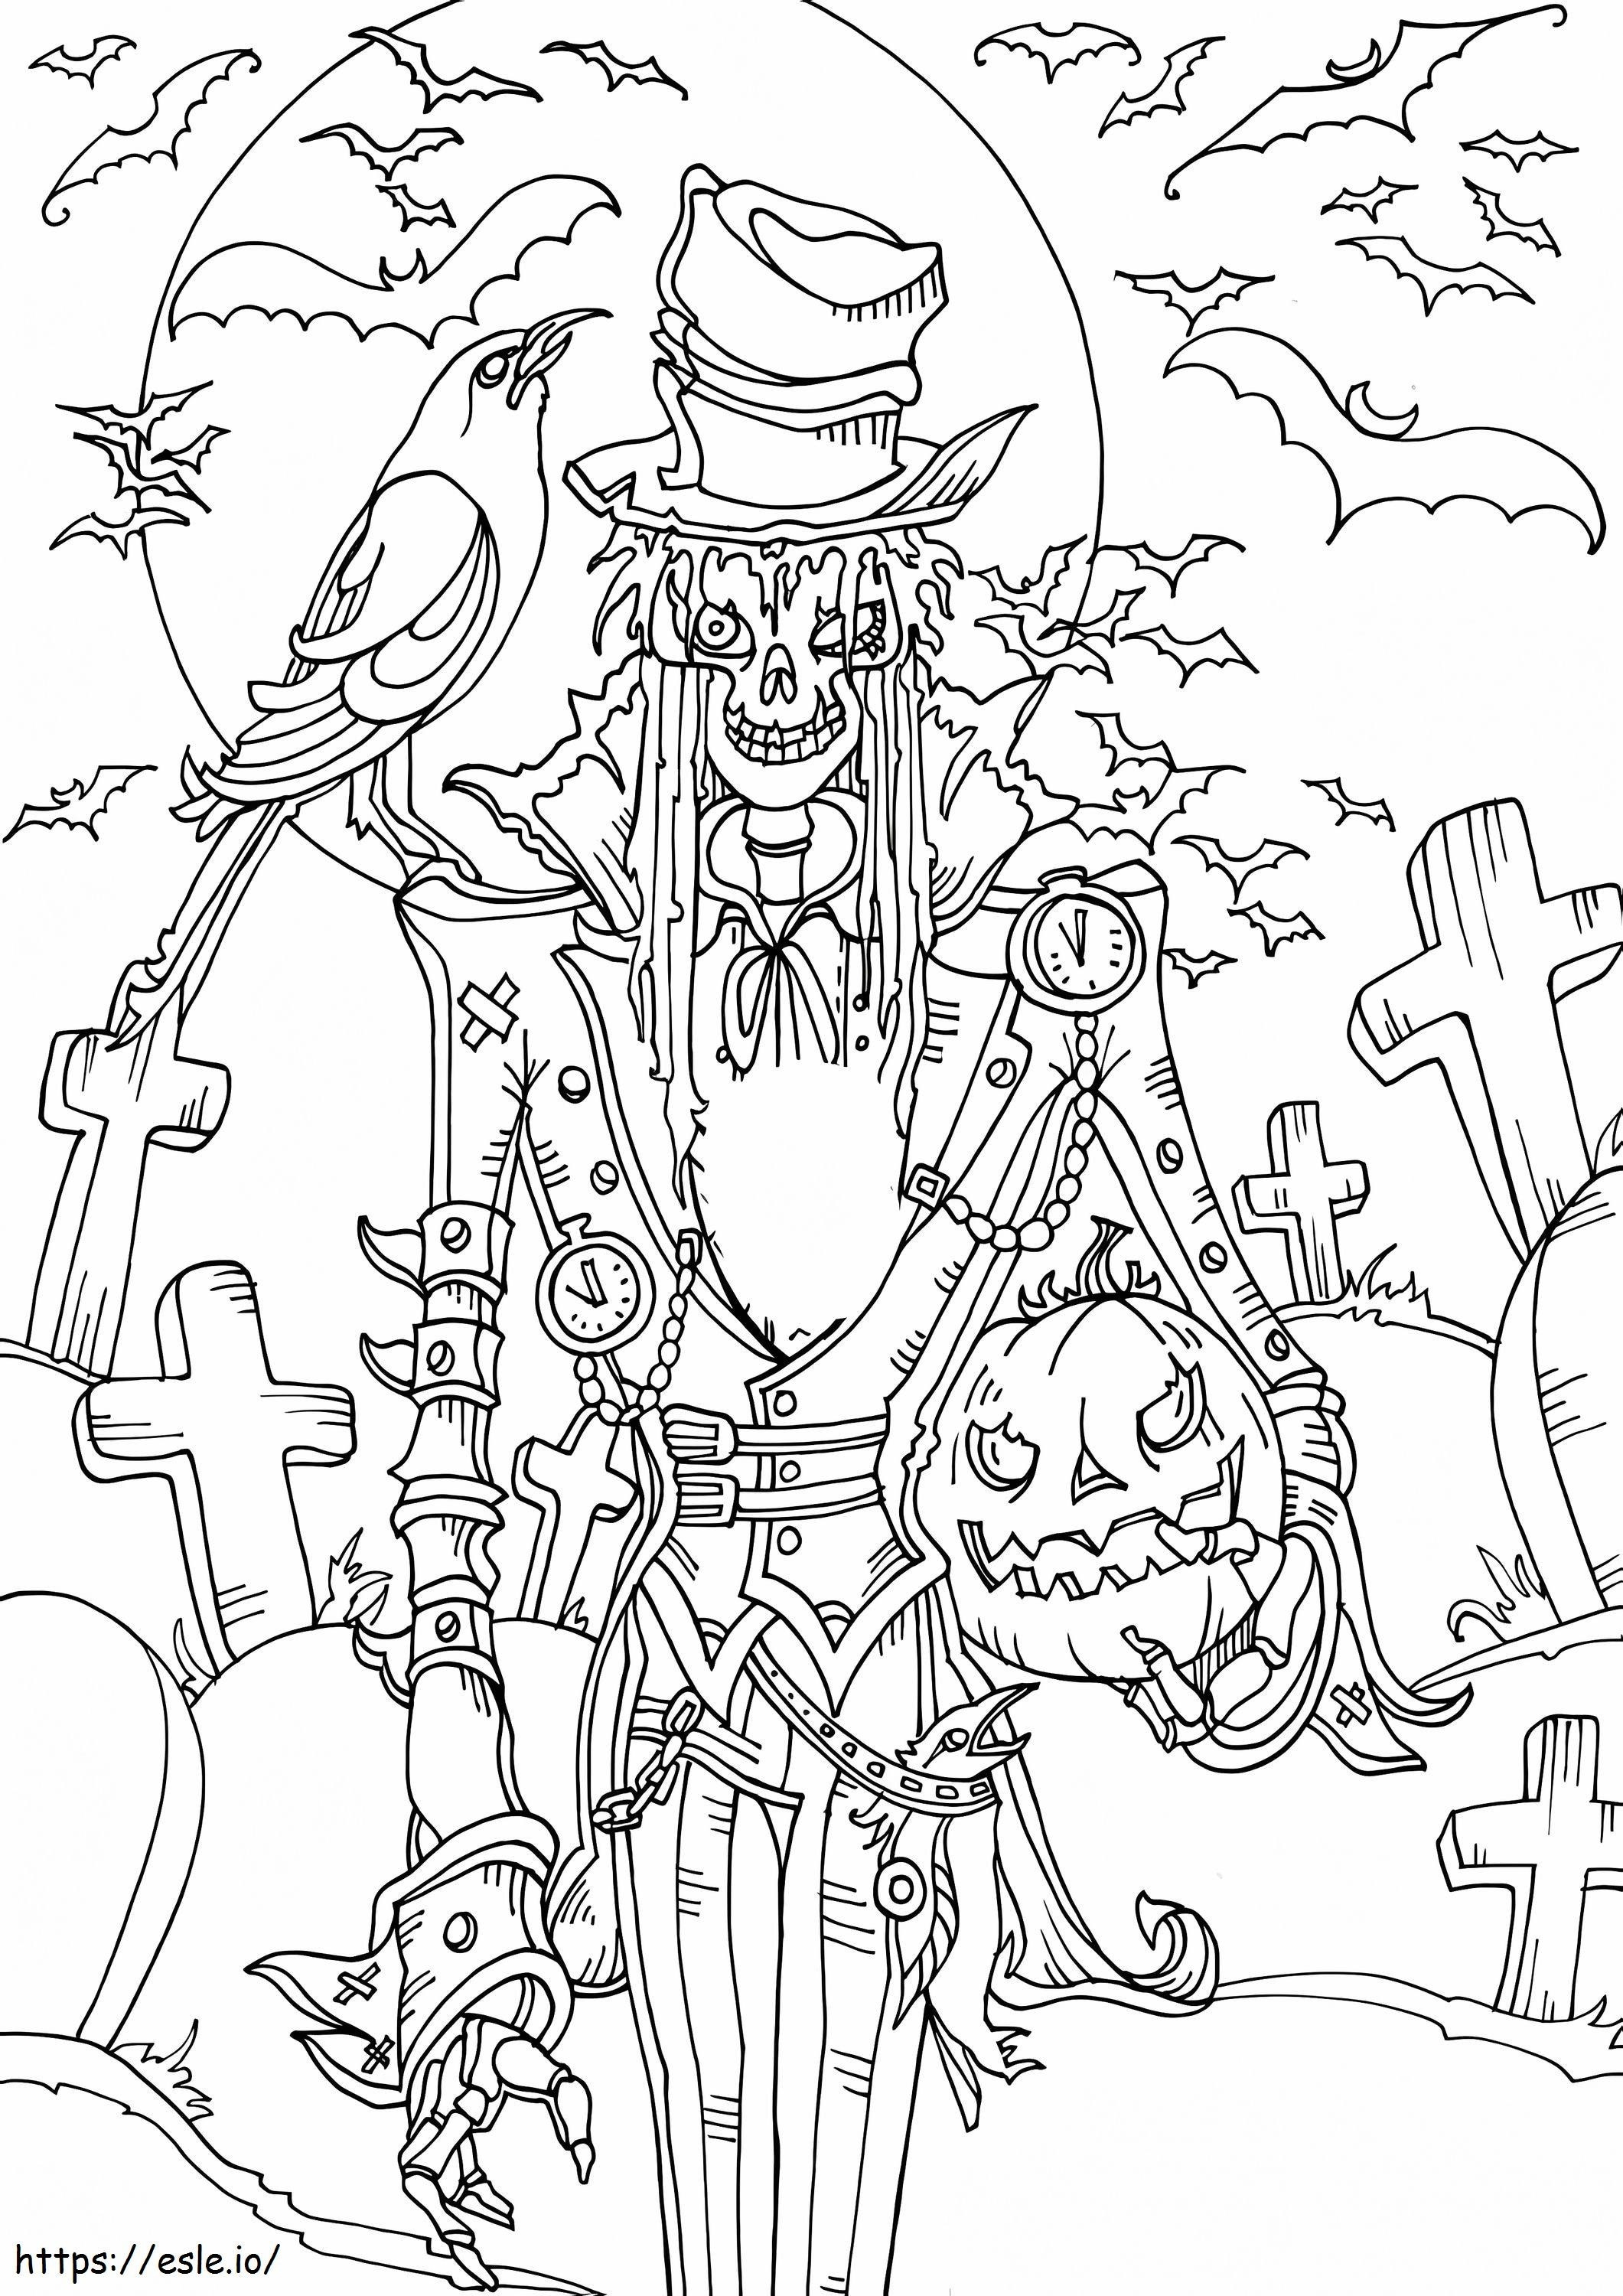 Horror Skeleton coloring page